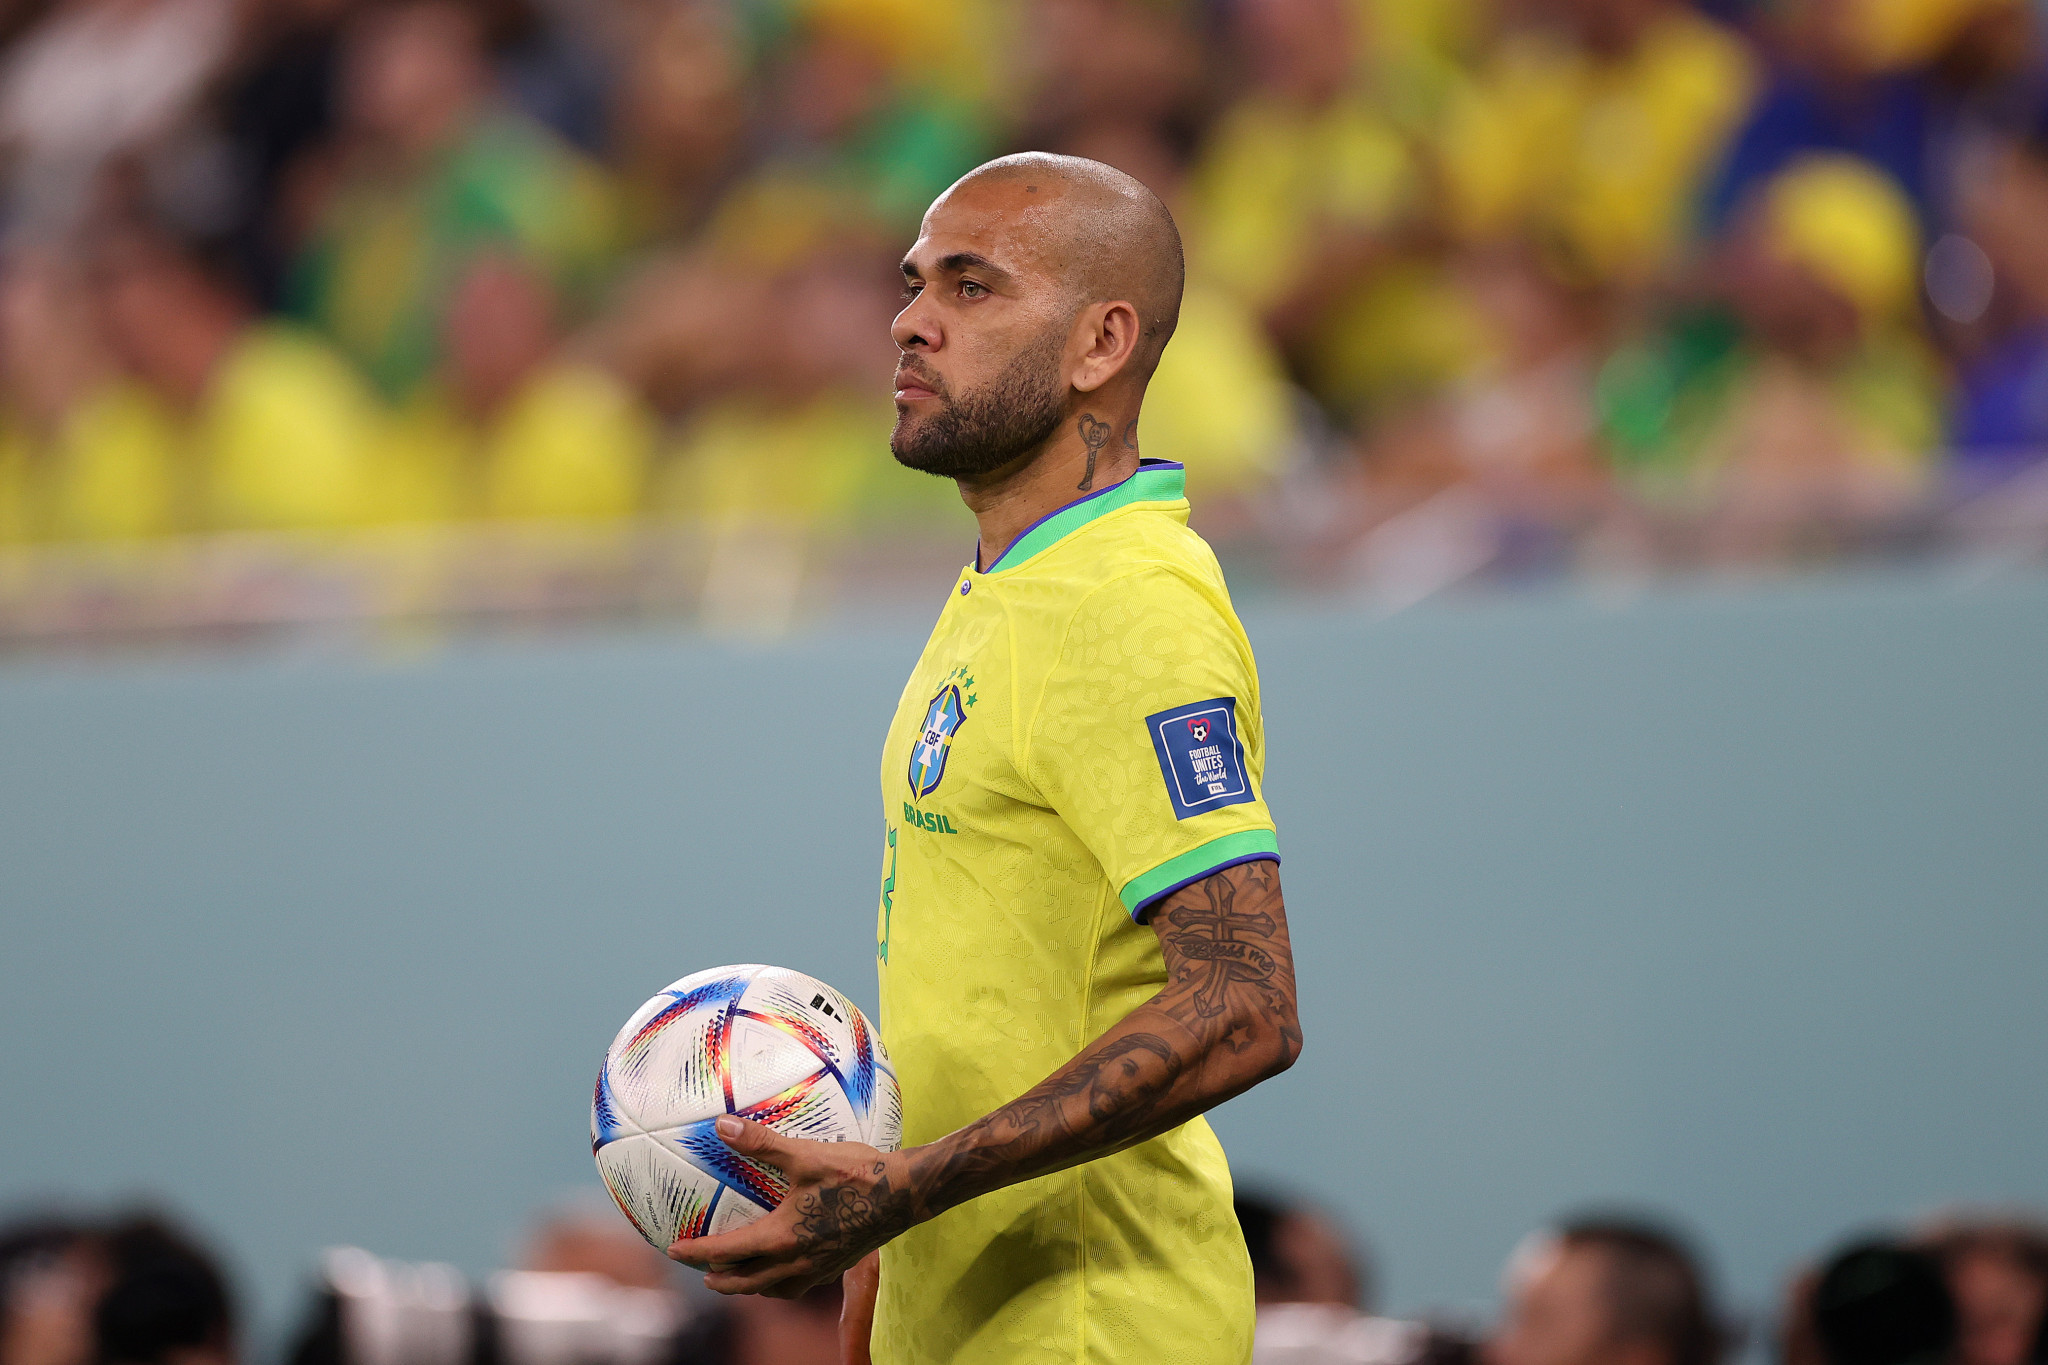 Brazil defender Alves remanded in custody on sexual assault charge photo